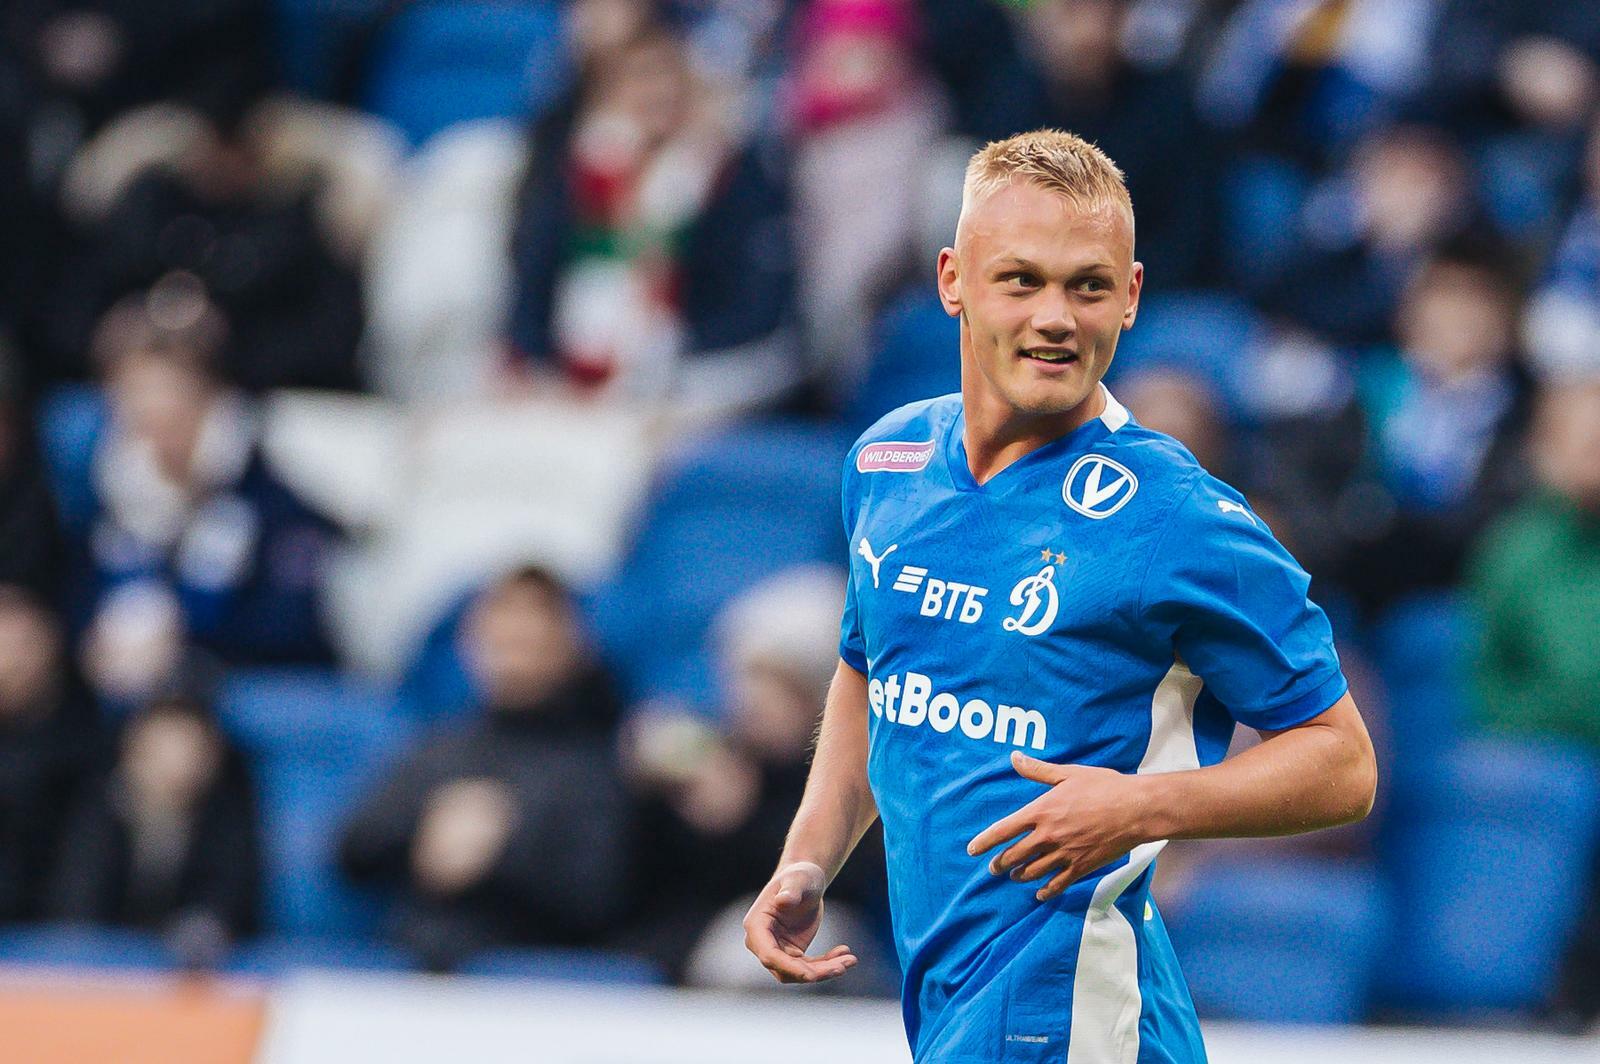 FC Dynamo Moscow News | Konstantin Tyukavin: "I'll be happy if I score 15 goals by the end of the season." Official Dynamo Club Website.